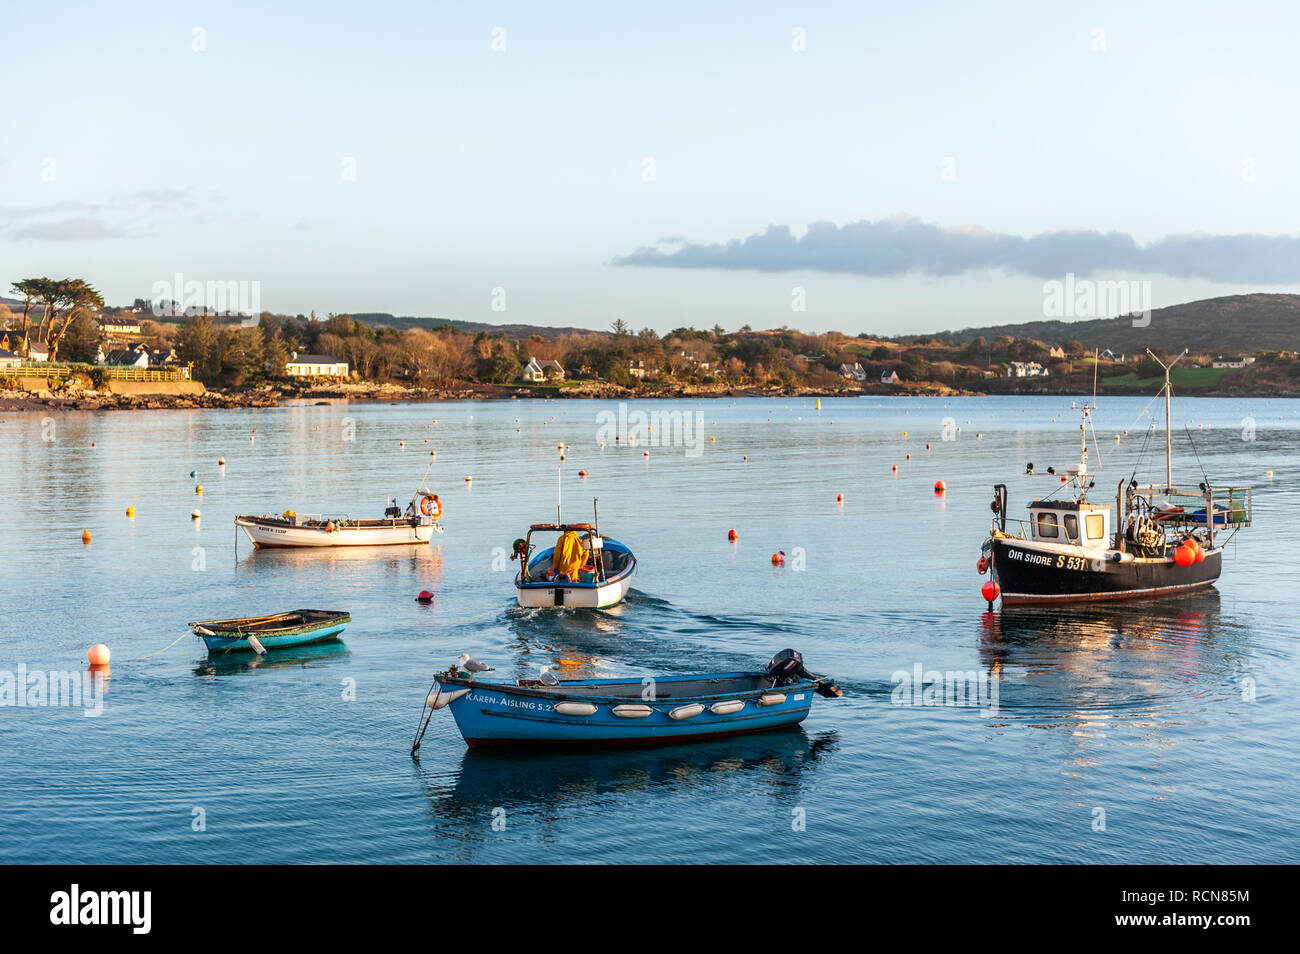 Schull, West Cork, Ireland. 16th Jan, 2019. A local fisherman sails away from Schull Harbour to haul his crab pots which have been soaking for a number of days. Met Eireann has put a yellow wind warning in place for counties Cork and Kerry from 12.00 to 17.00 today. Wind will reach mean speed between 50 to 65 km/h with gusts of up to 90km/h. Credit: AG News/Alamy Live News Stock Photo